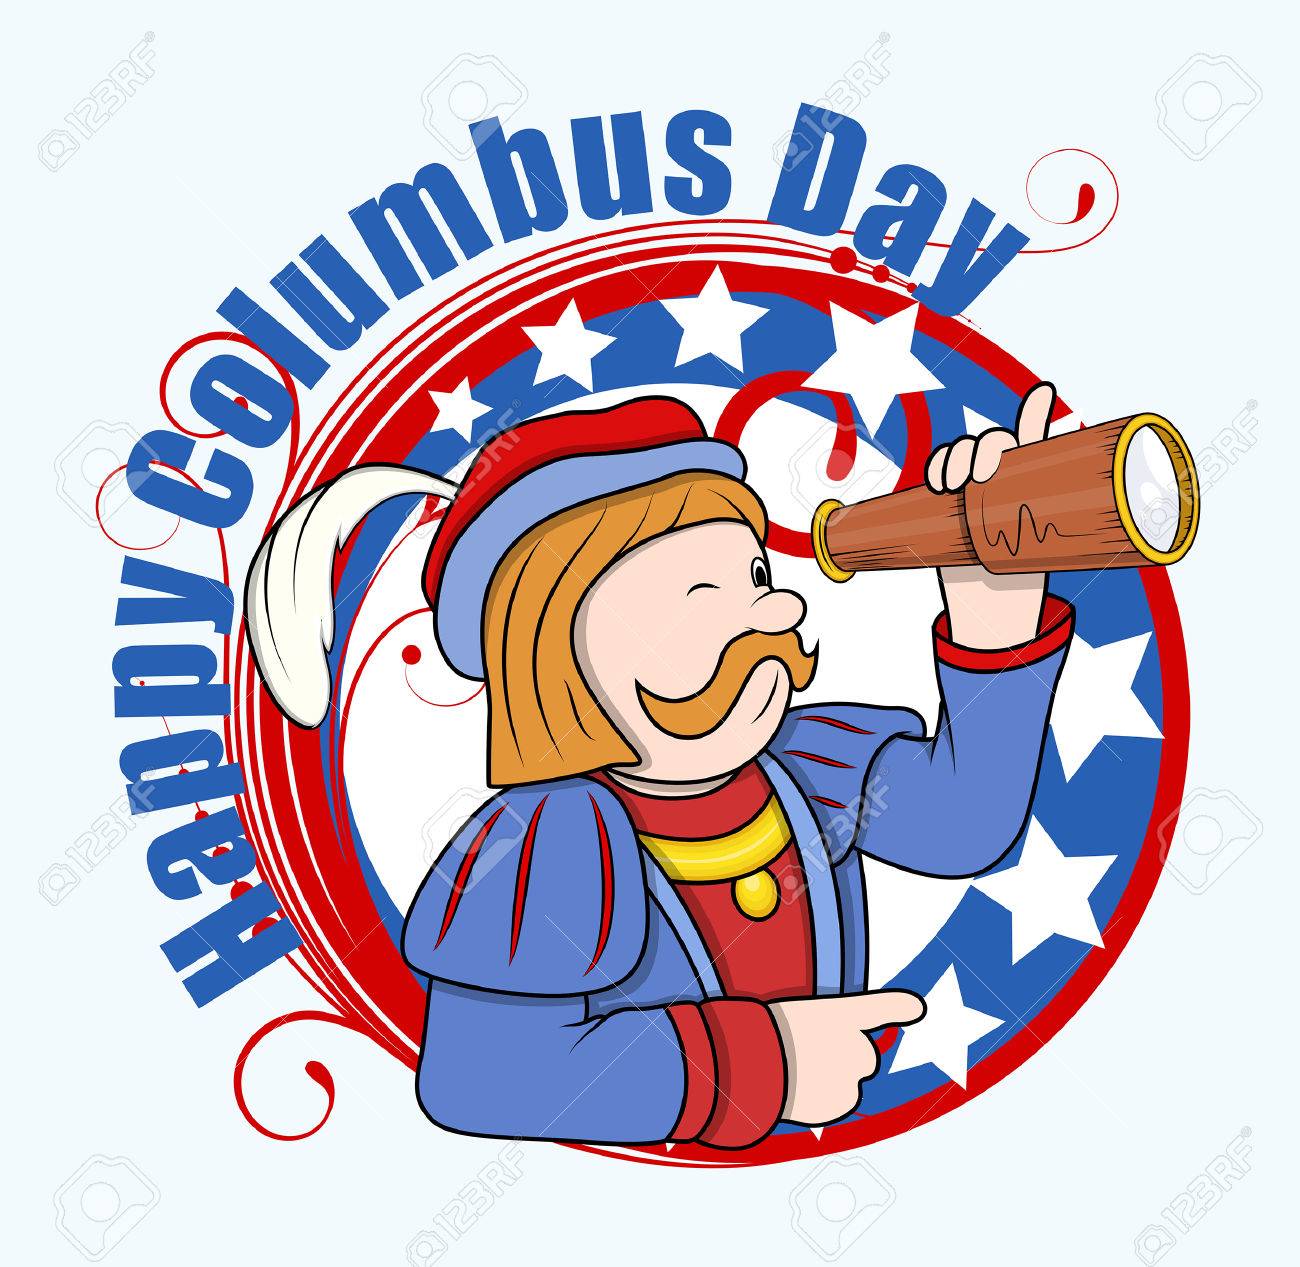 Cartoon Man with Telescope Columbus Day Graphic Banner Vector.